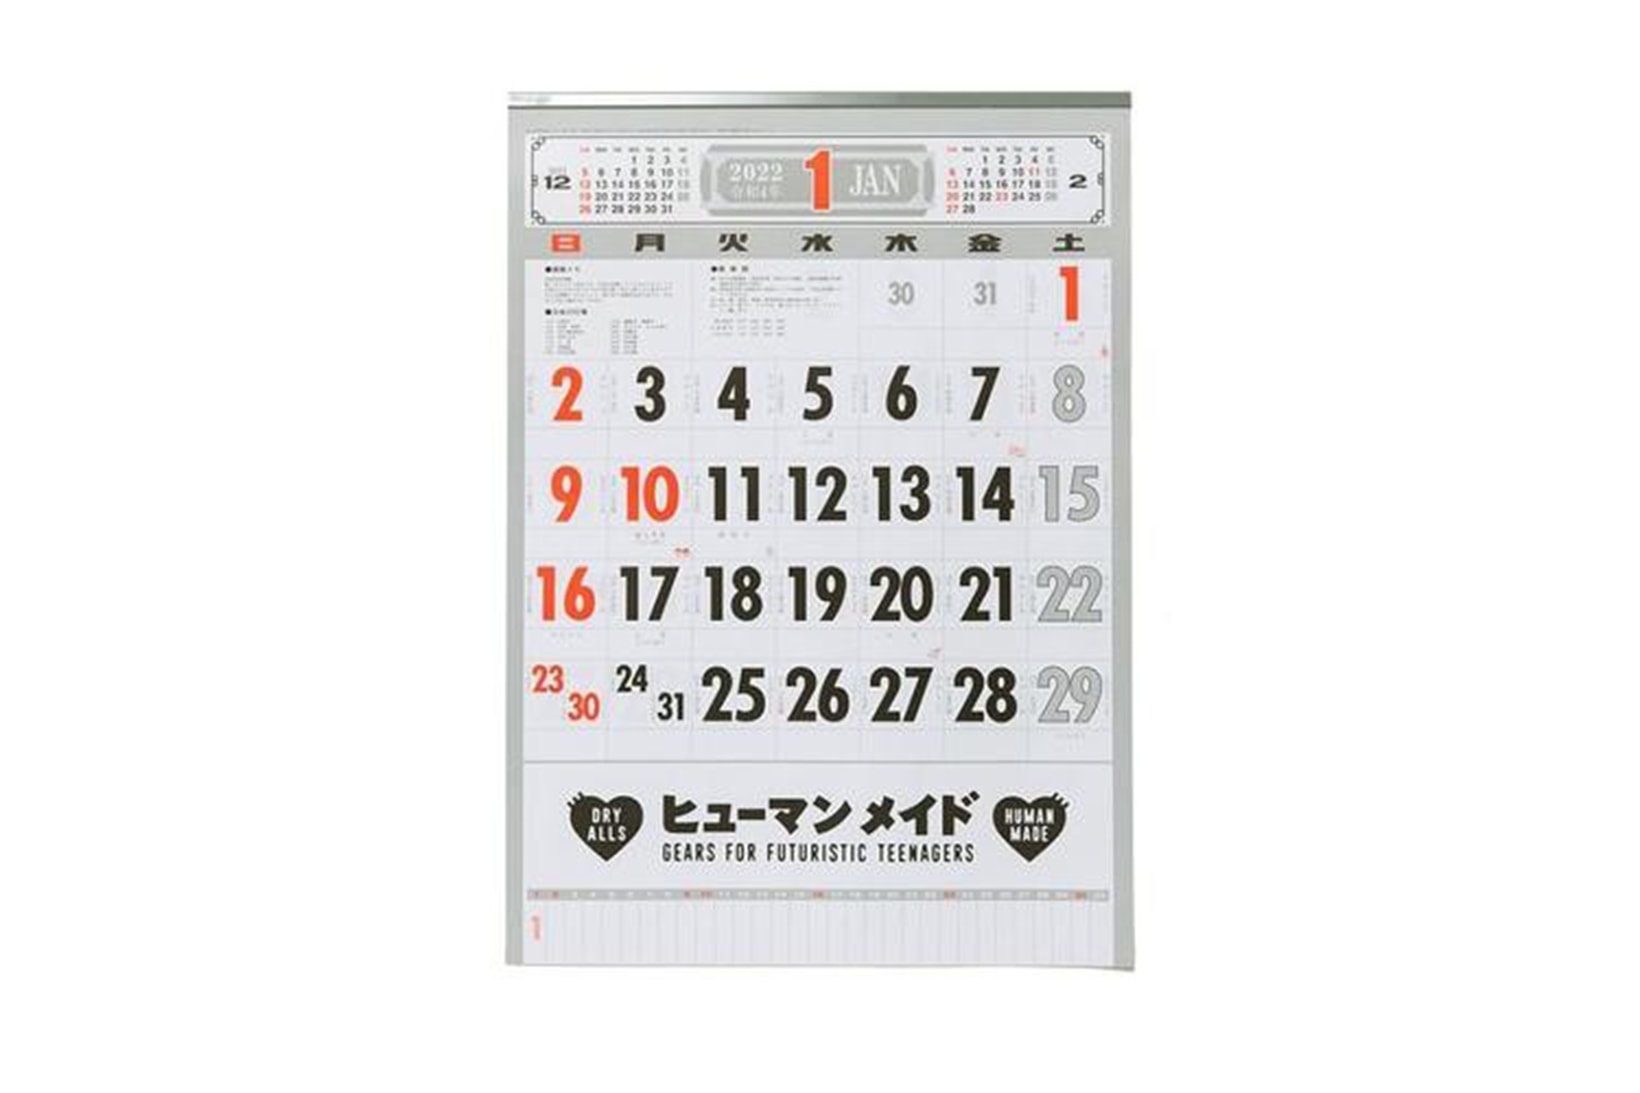 HMD Holiday Capsule Collection Exclusive Calendar Limited Edition